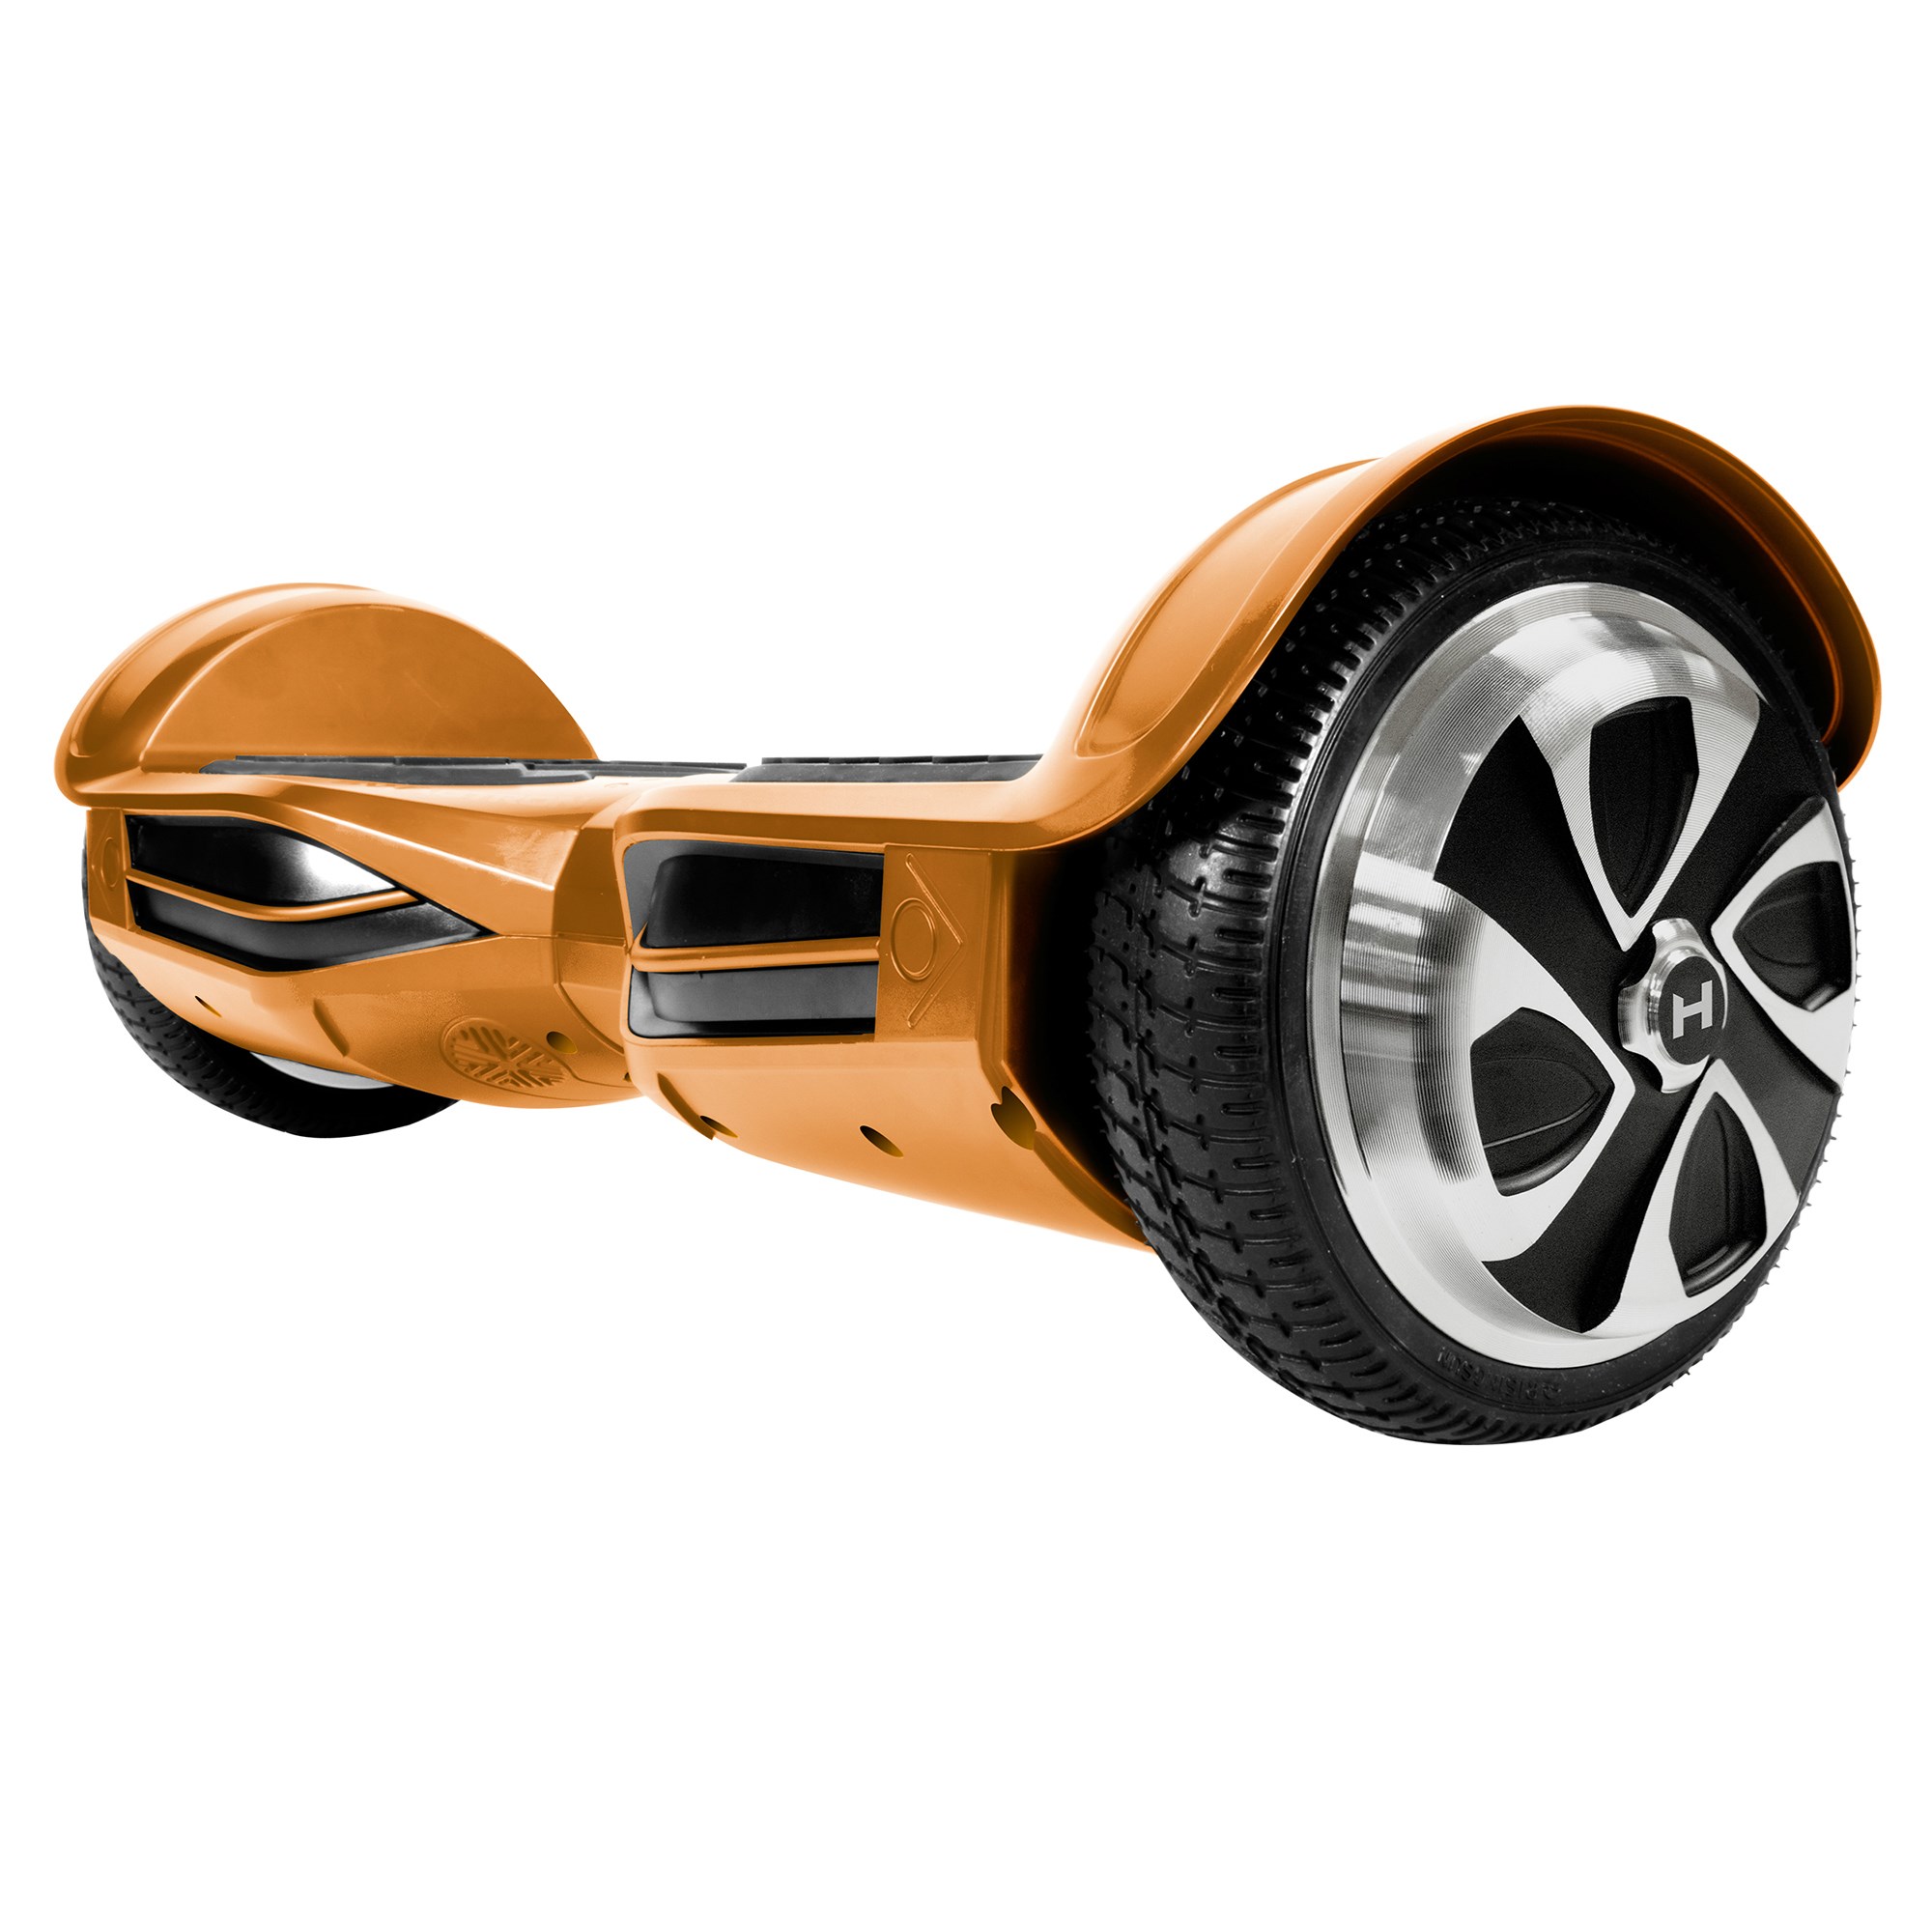 Hoverzone Hoverboard XLS - gold